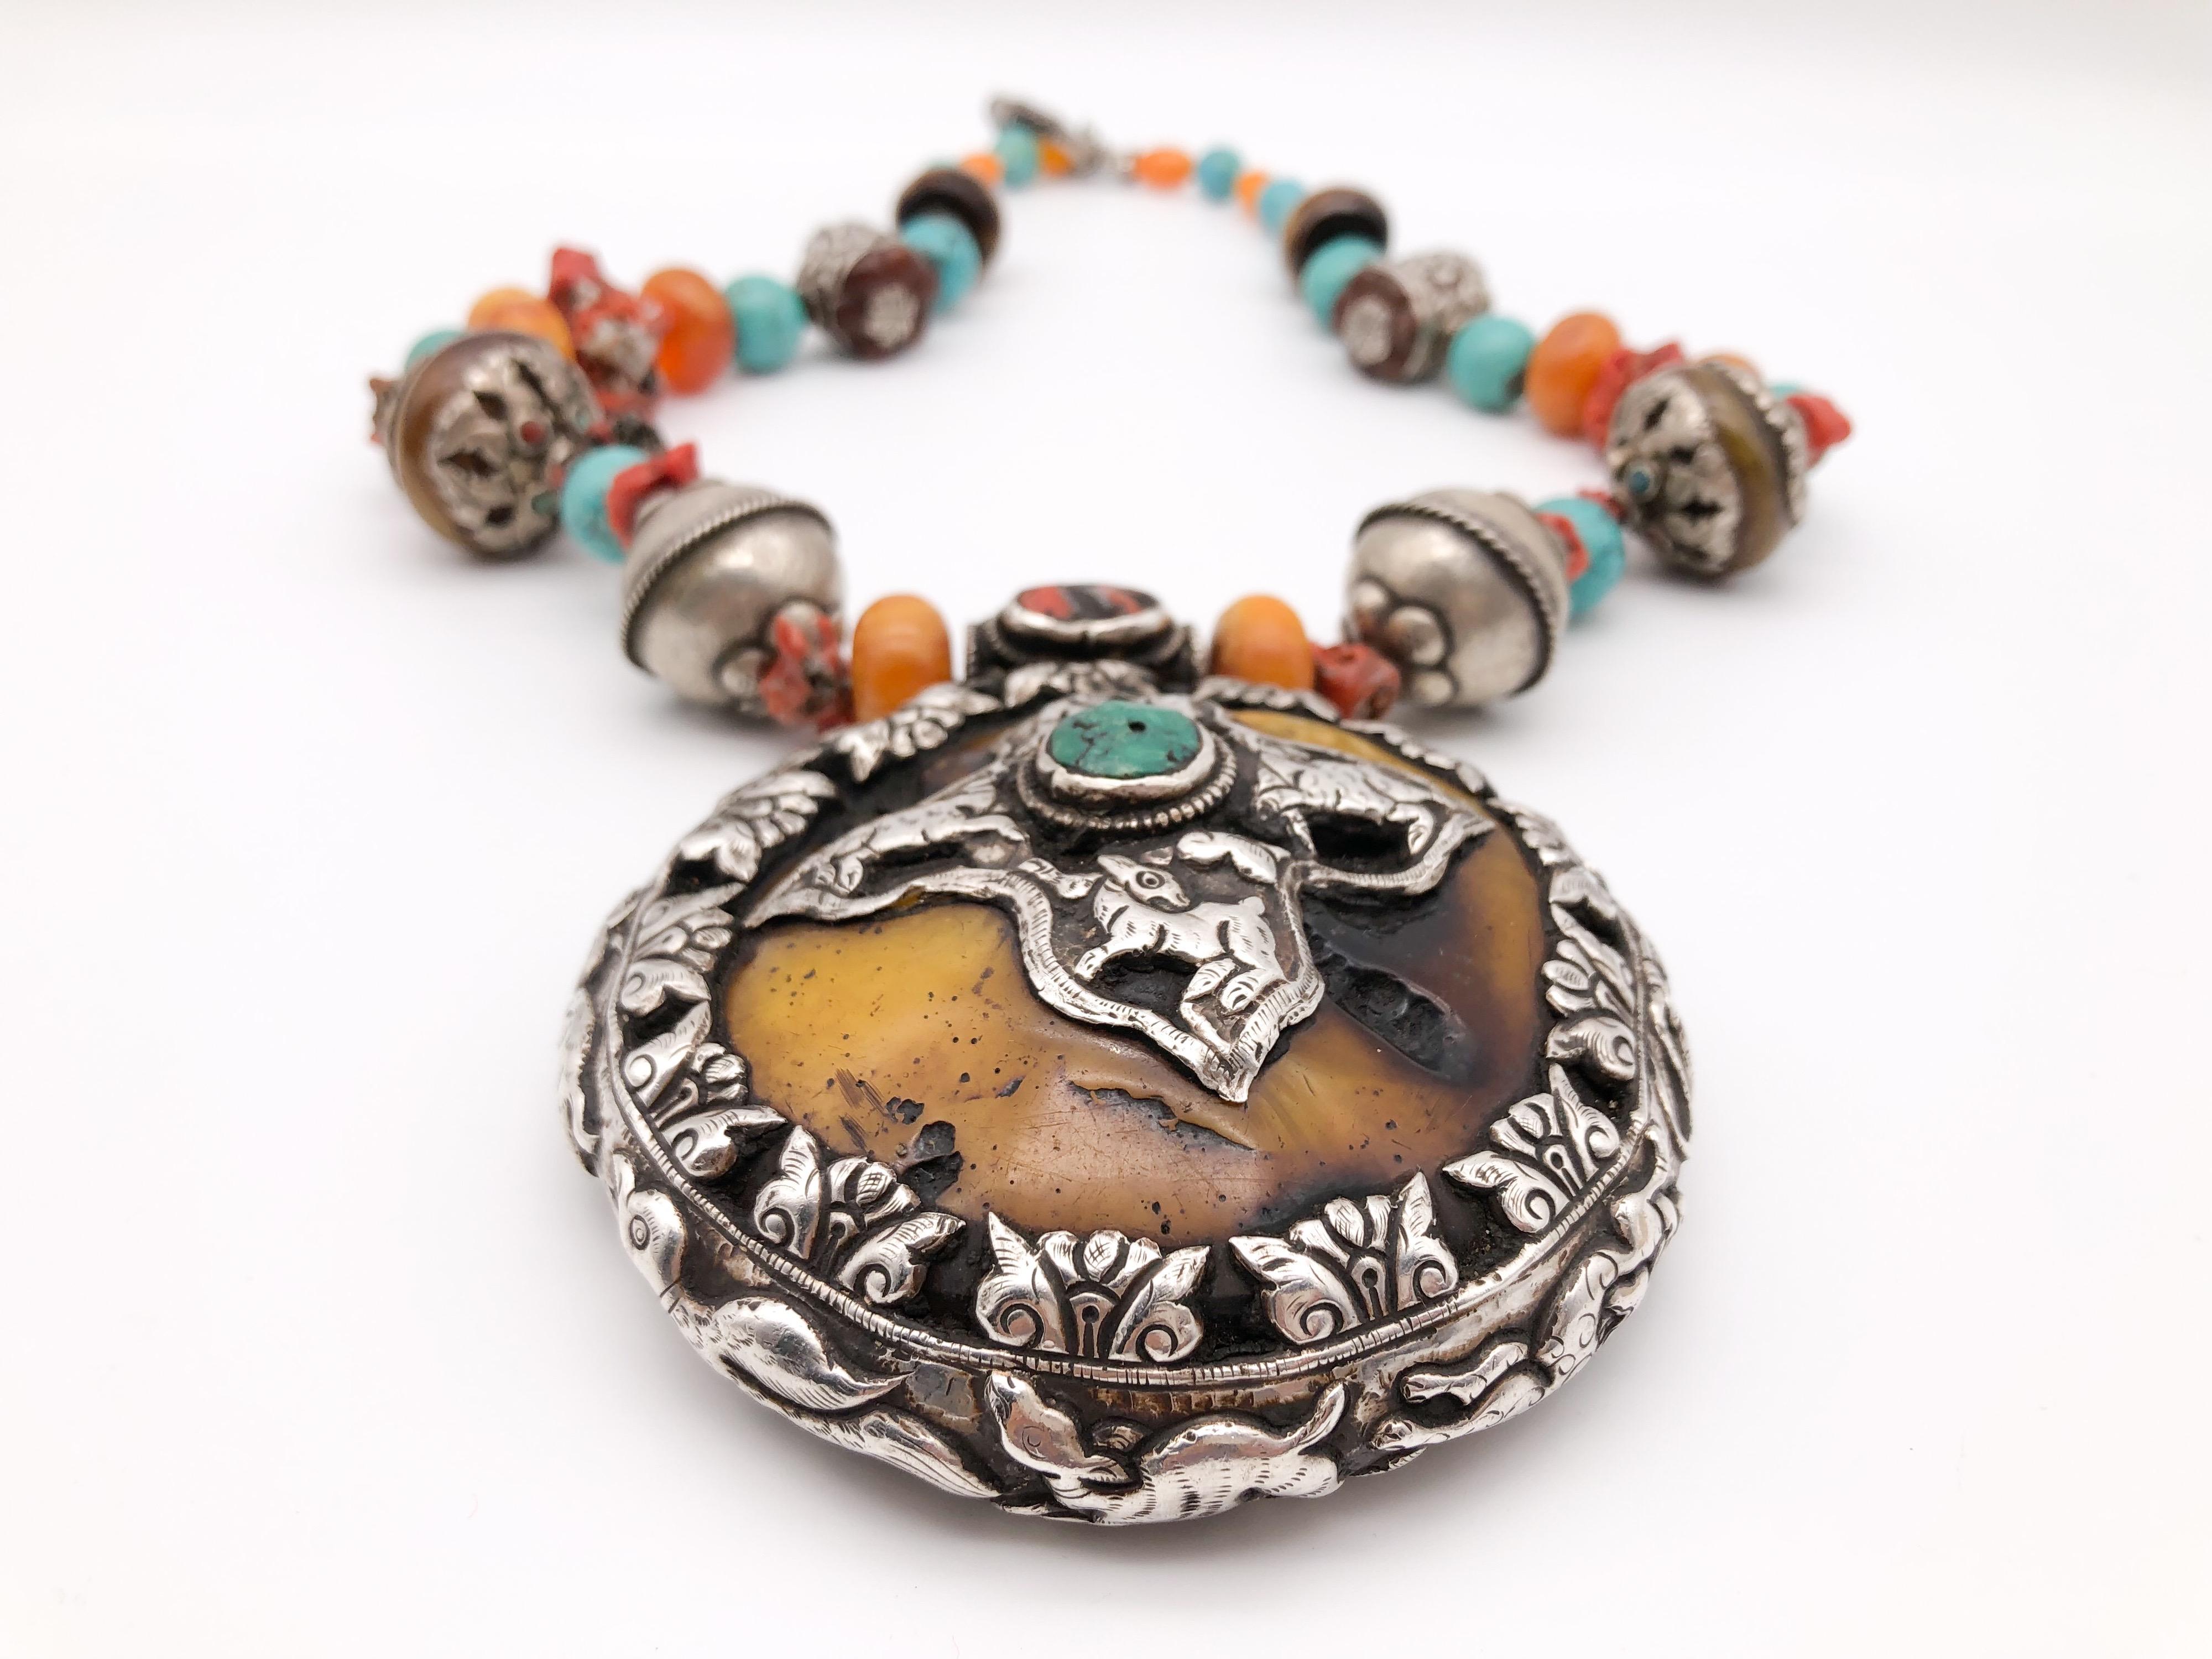 A.Jeschel Magnificent necklace with Tibetan Bold Sterling Silver Pendant In New Condition For Sale In Miami, FL